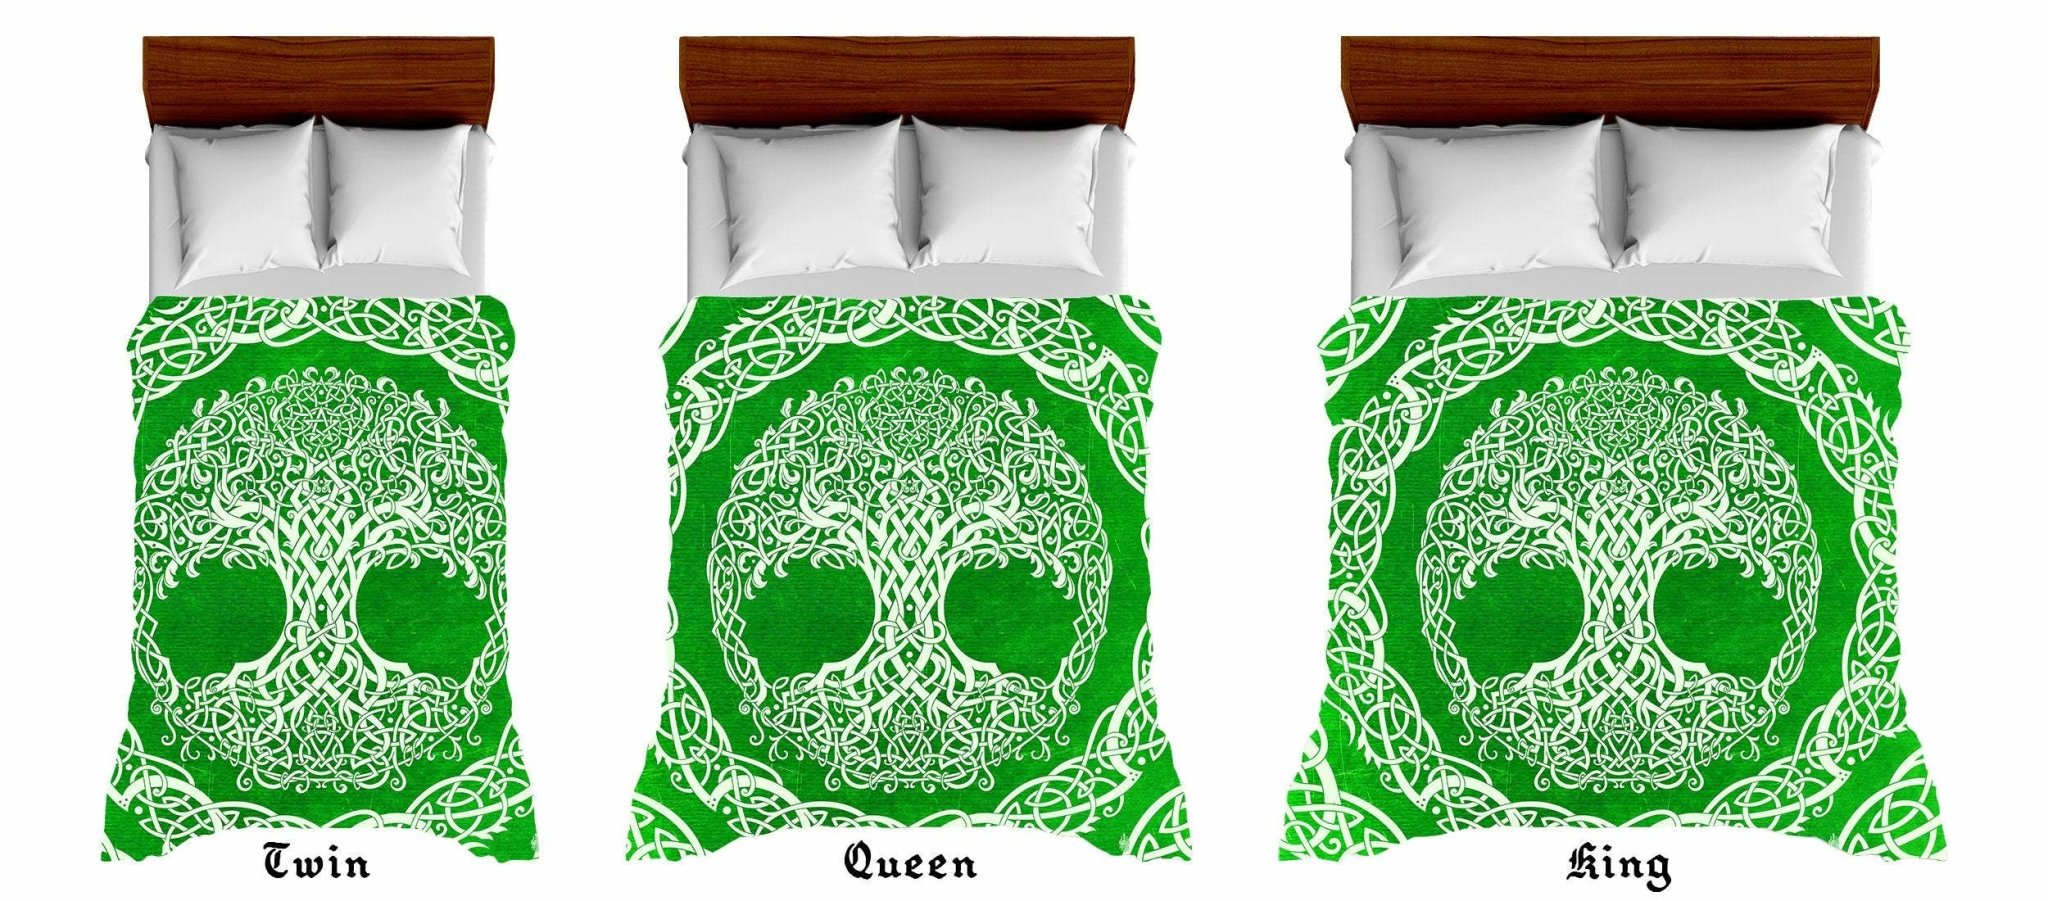 Tree of Life Bedding Set, Comforter and Duvet, Indie Bed Cover, Wiccan Bedroom Decor King, Queen and Twin Size - Celtic, Green - Abysm Internal